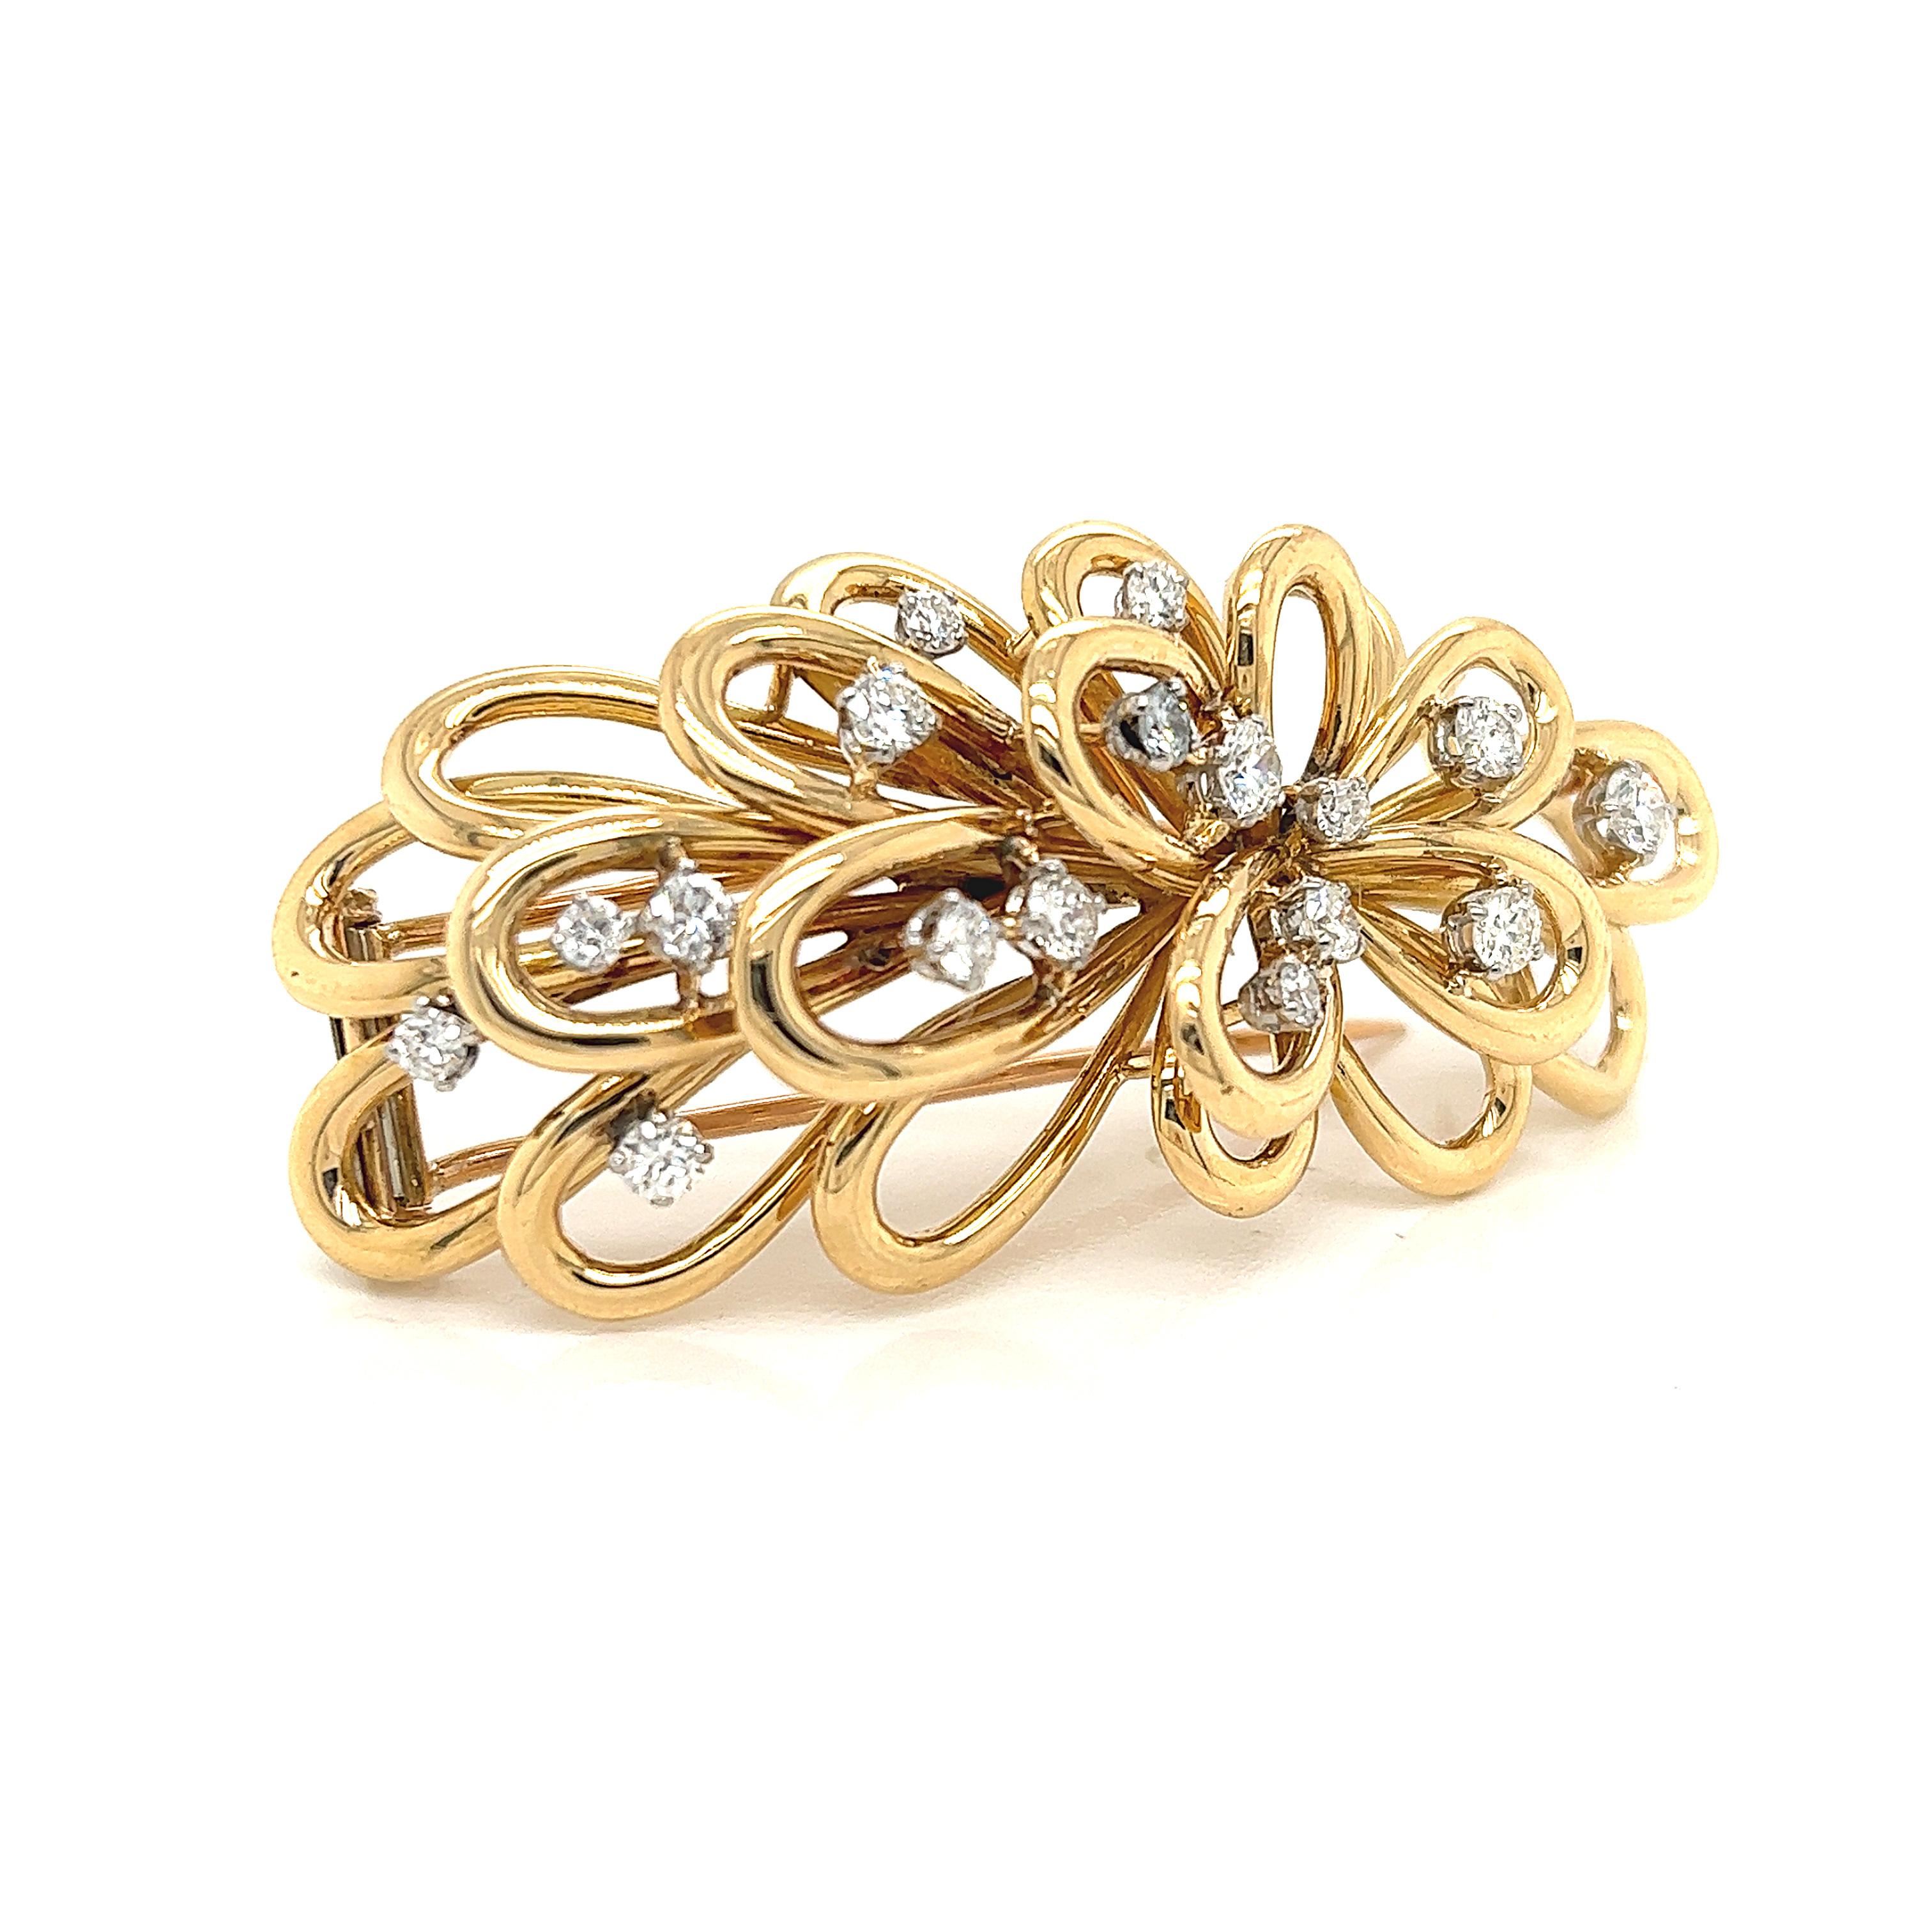 Beautiful craftsman ship shown on this one of a kind piece from Van Cleef & Arpels.  This unique hair clip brooch is crafted in 18k yellow gold adorned with natural round brilliant cut diamonds ranging in sizes from 0.5 - 0.20 ct. throughout the